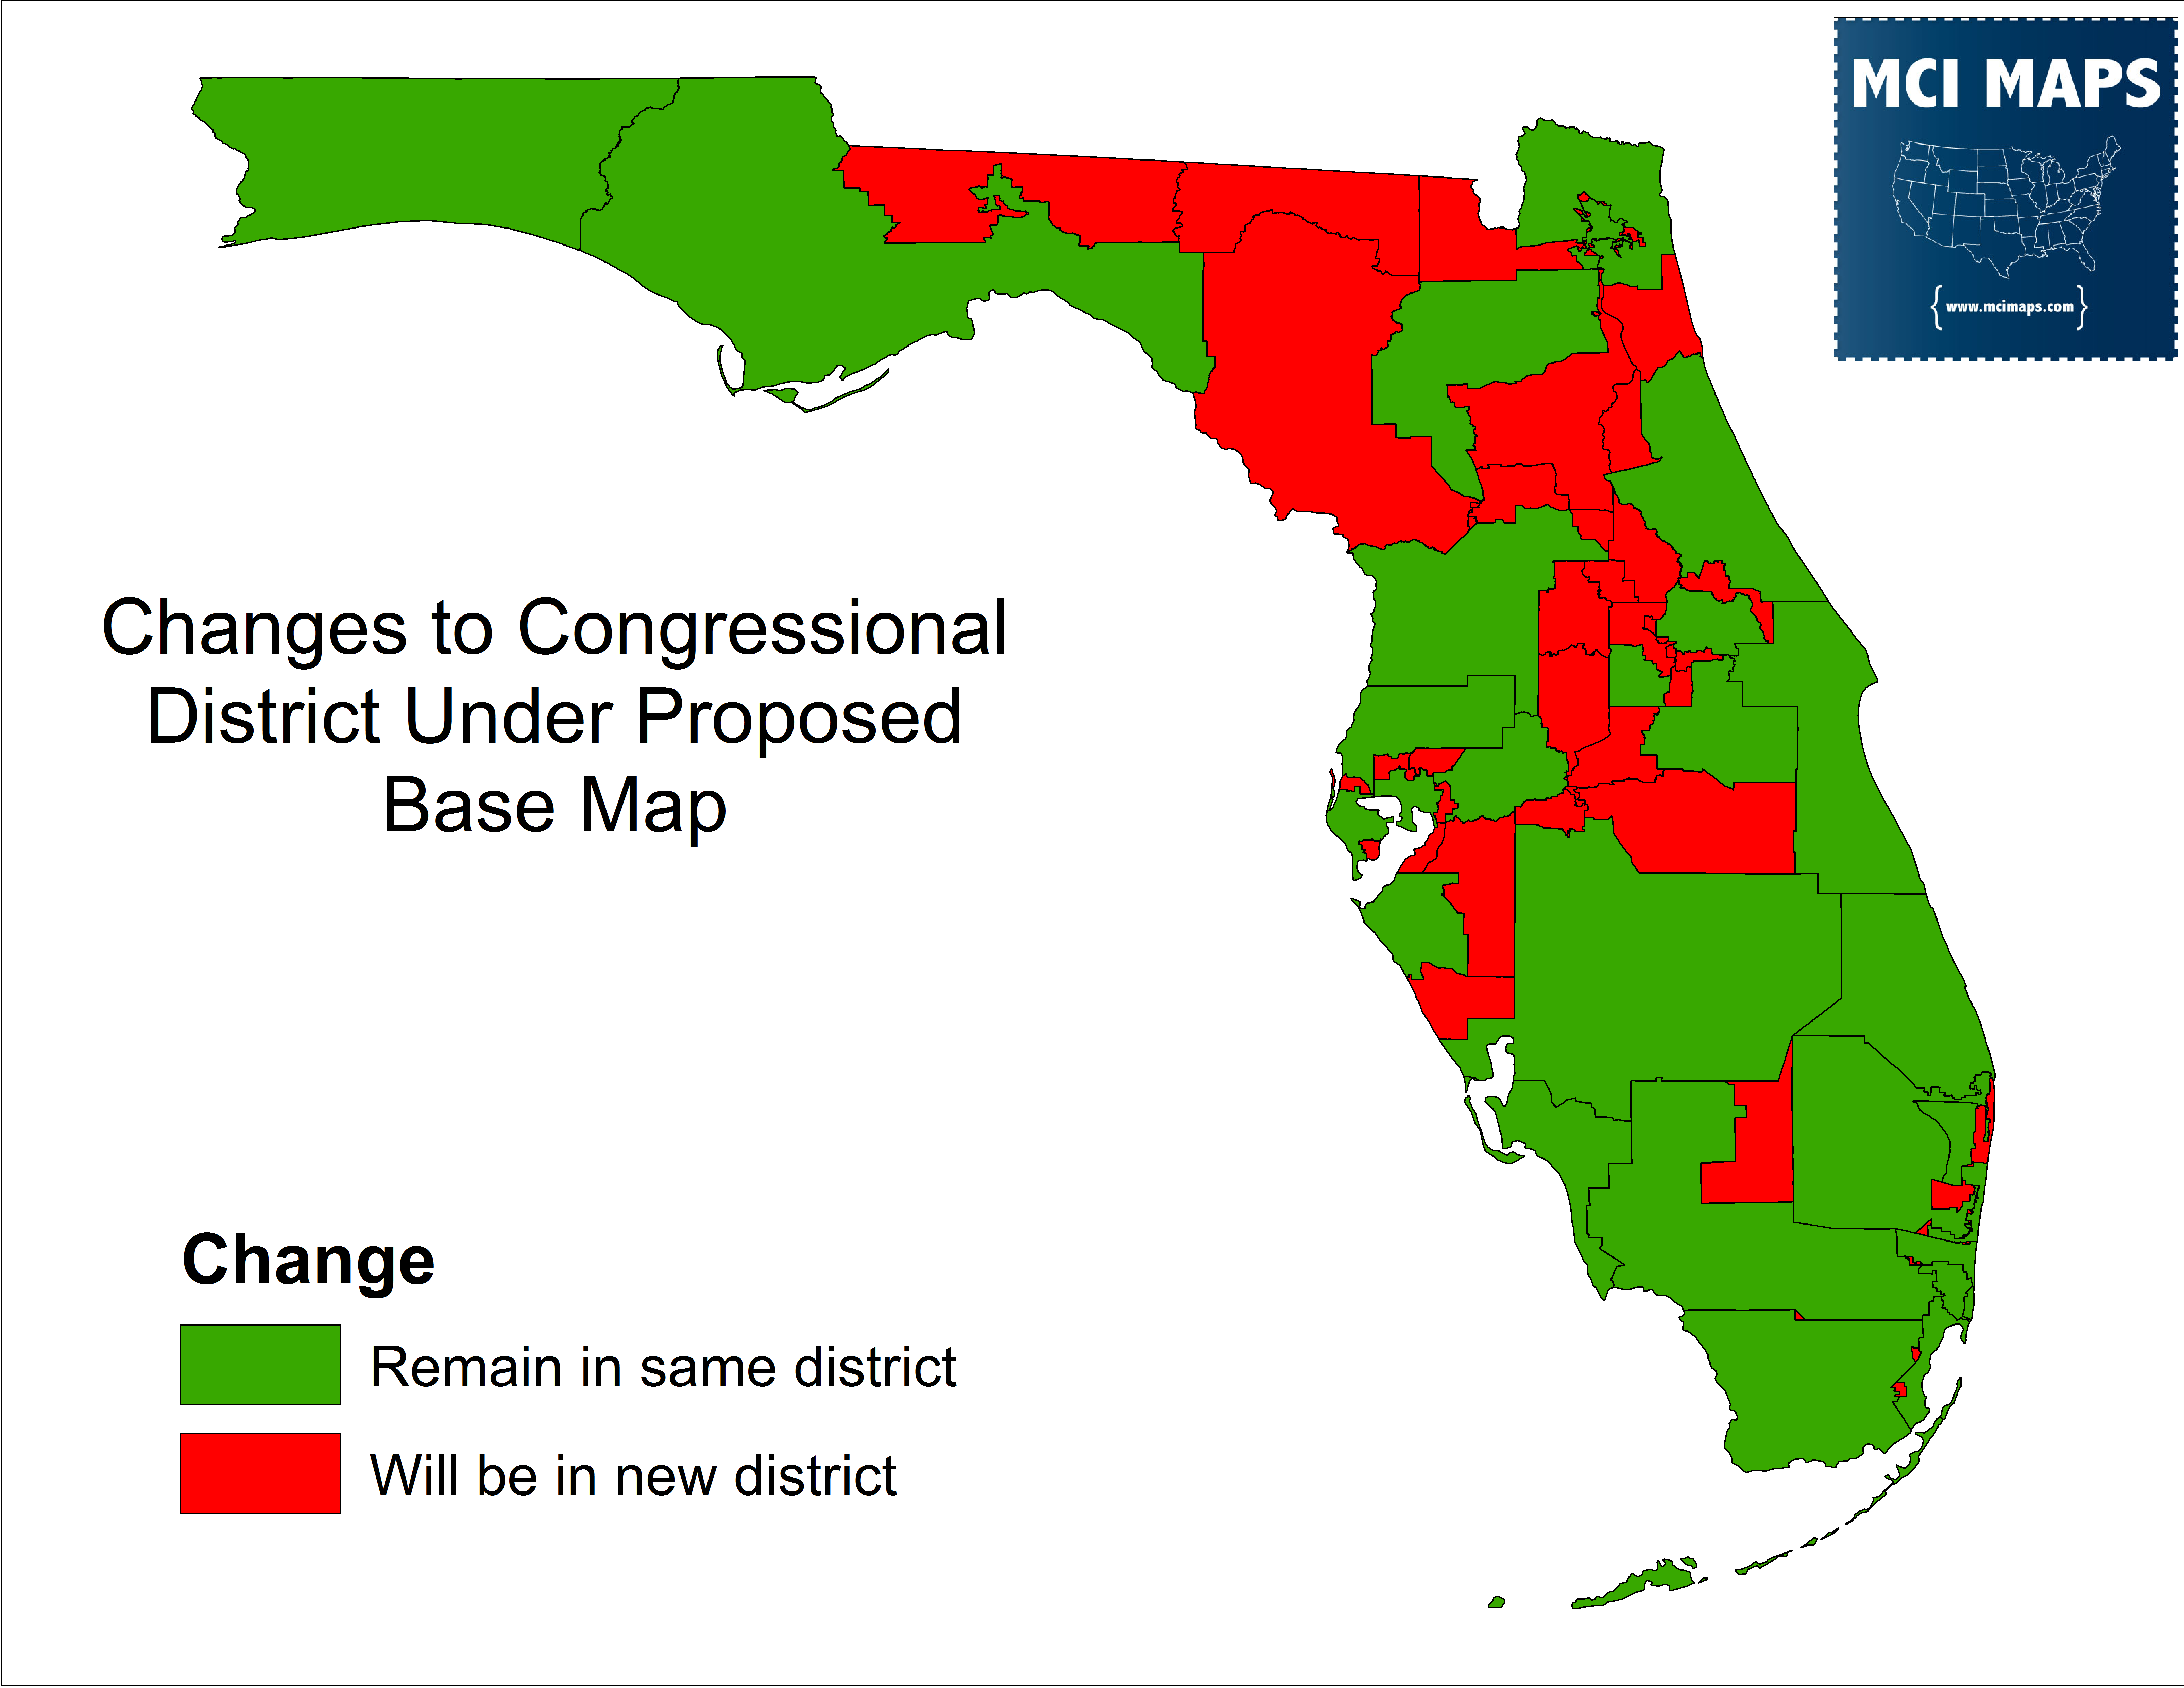 The Complete Breakdown of Florida’s Proposed Congressional Districts